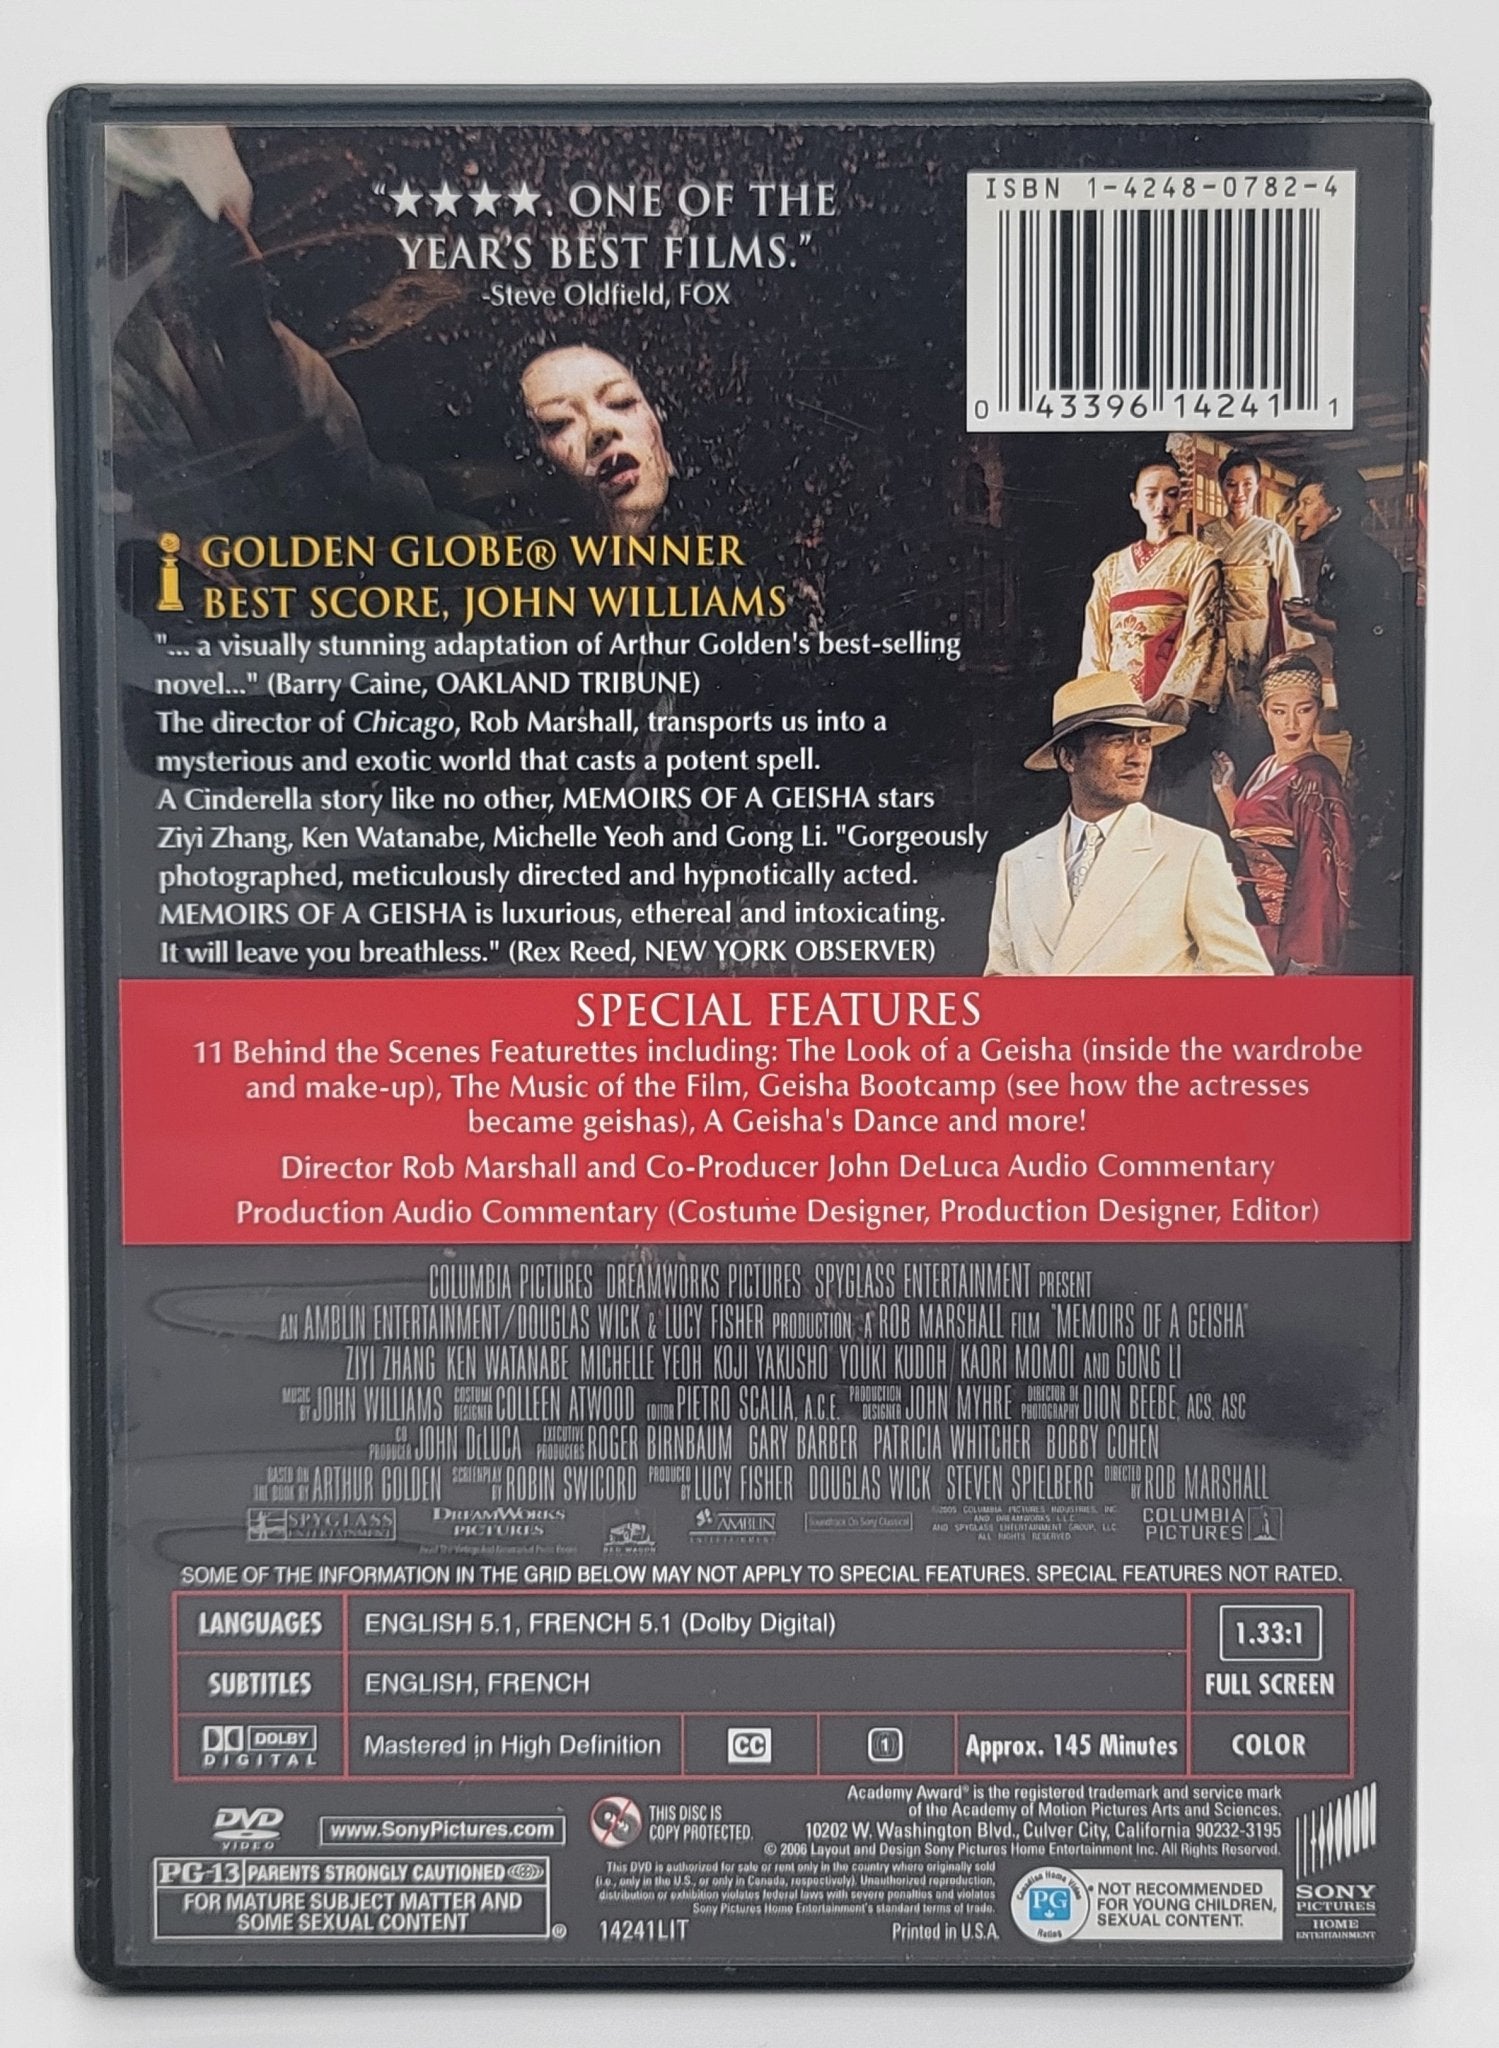 Sony Pictures Home Entertainment - Memoirs of Geisha | DVD | 2 Disc Full Screen Special Edition - DVD - Steady Bunny Shop